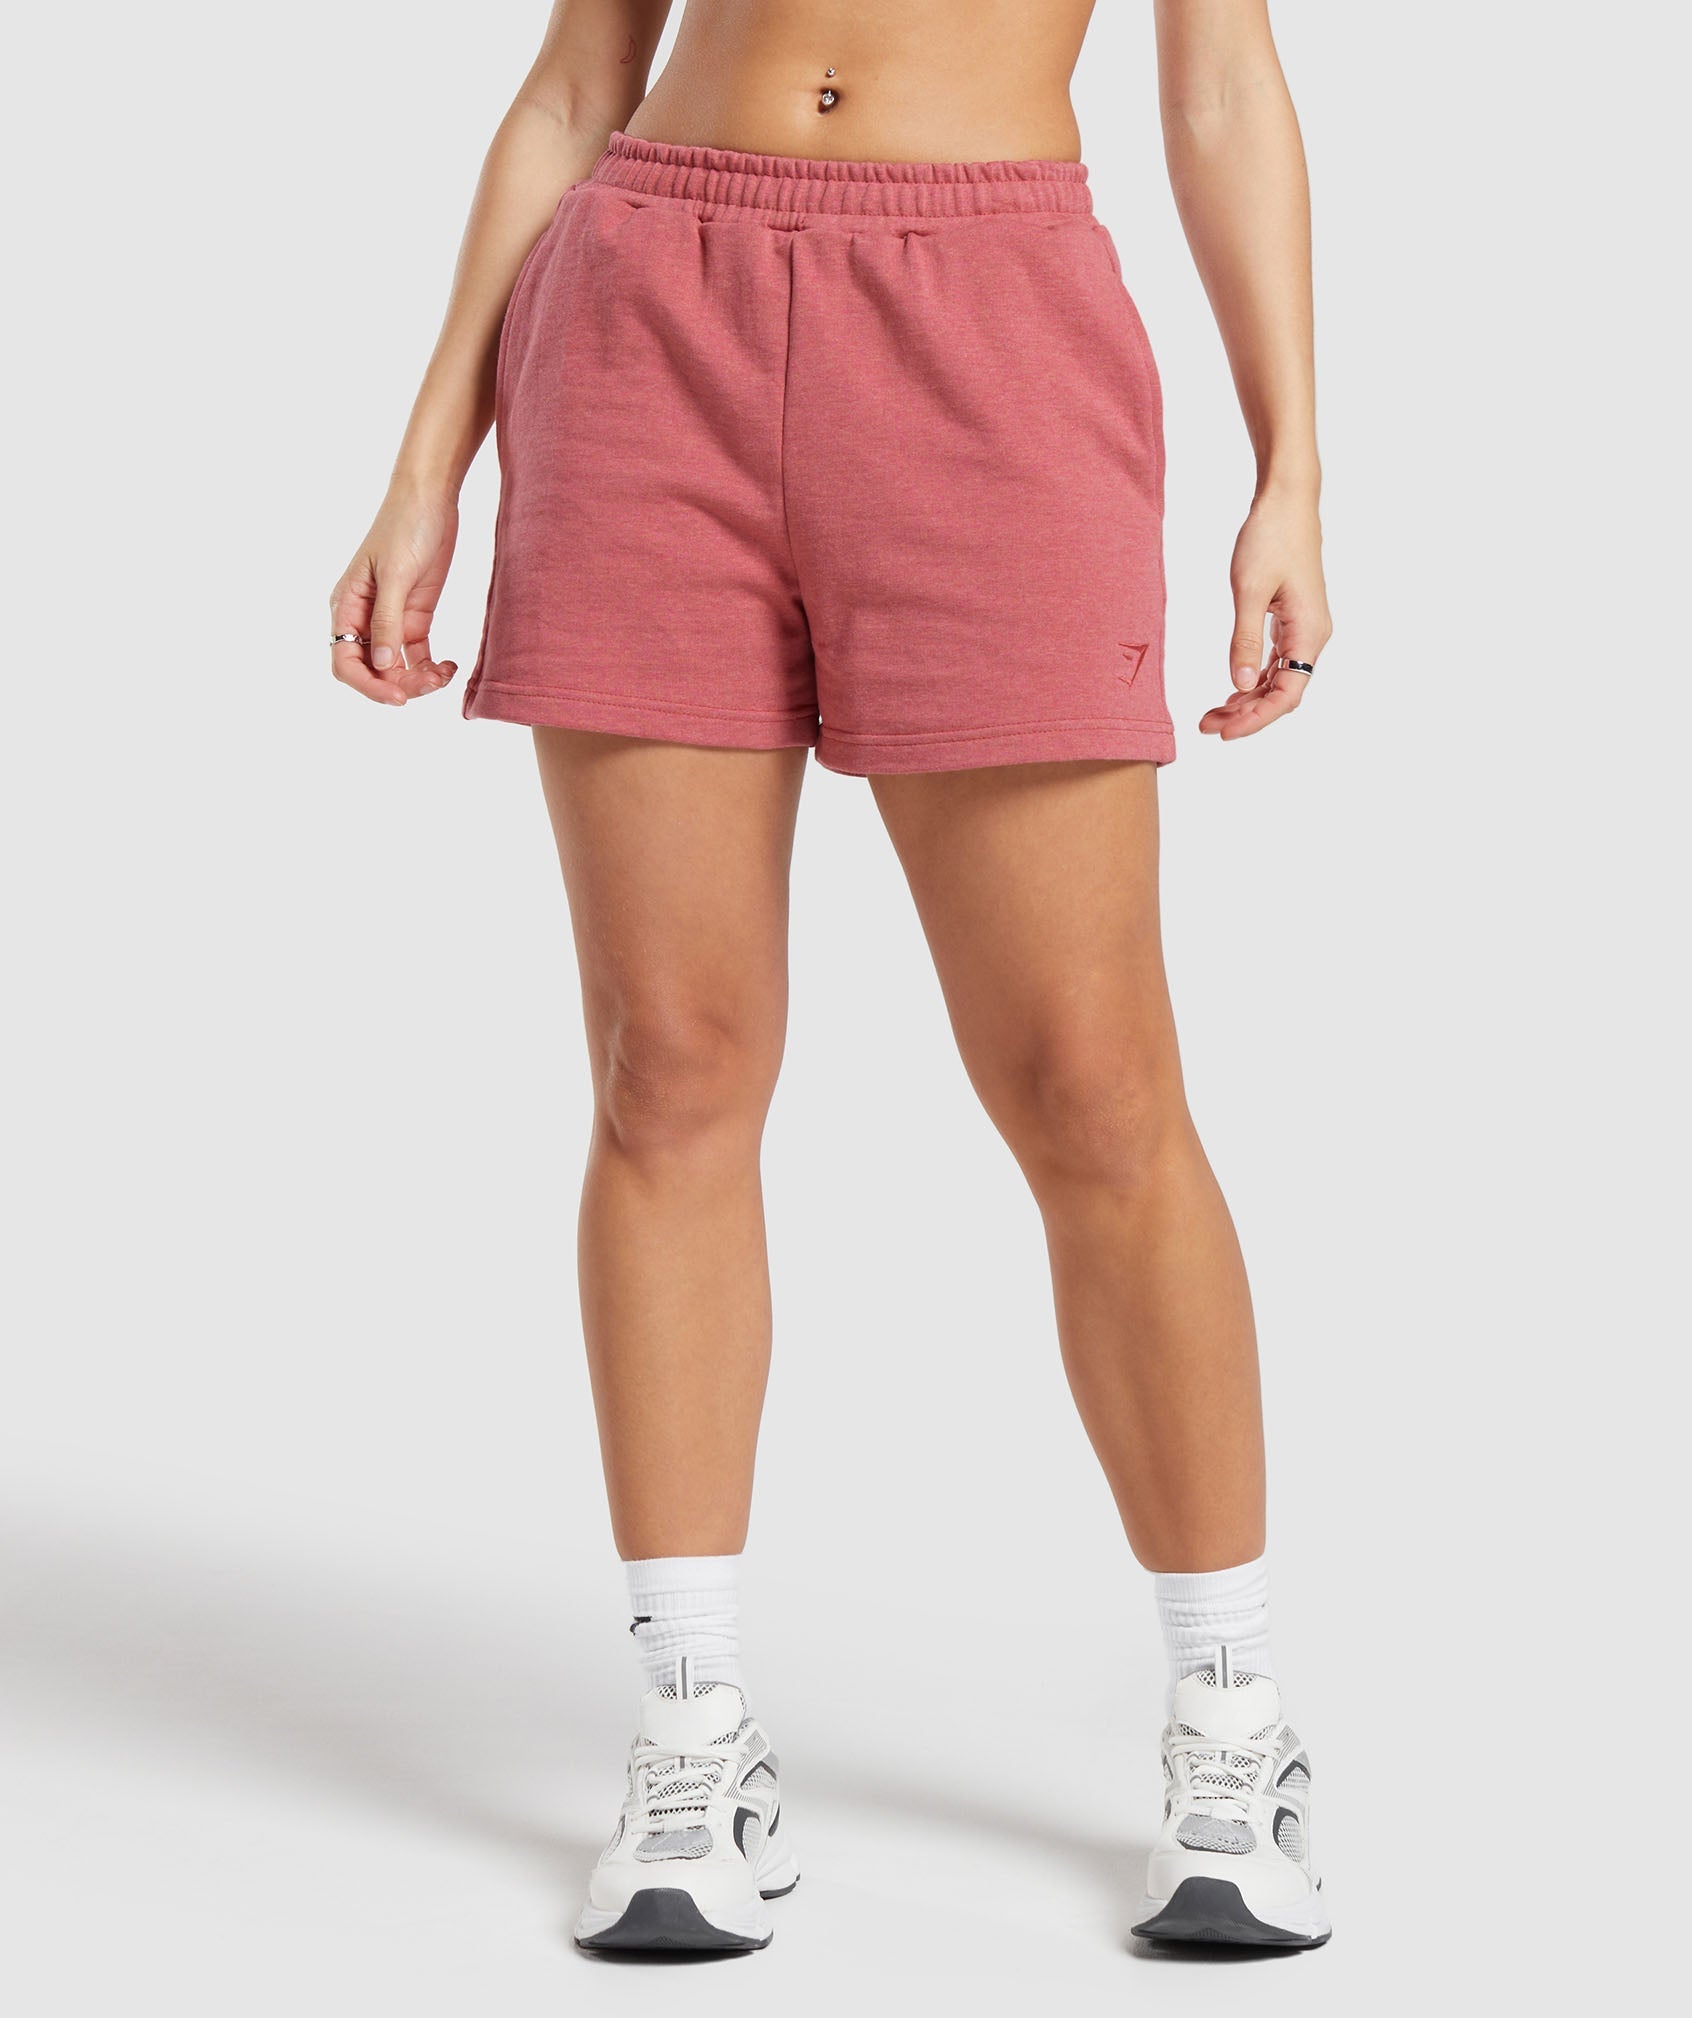 Rest Day Sweat Shorts in Heritage Pink Marl - view 1